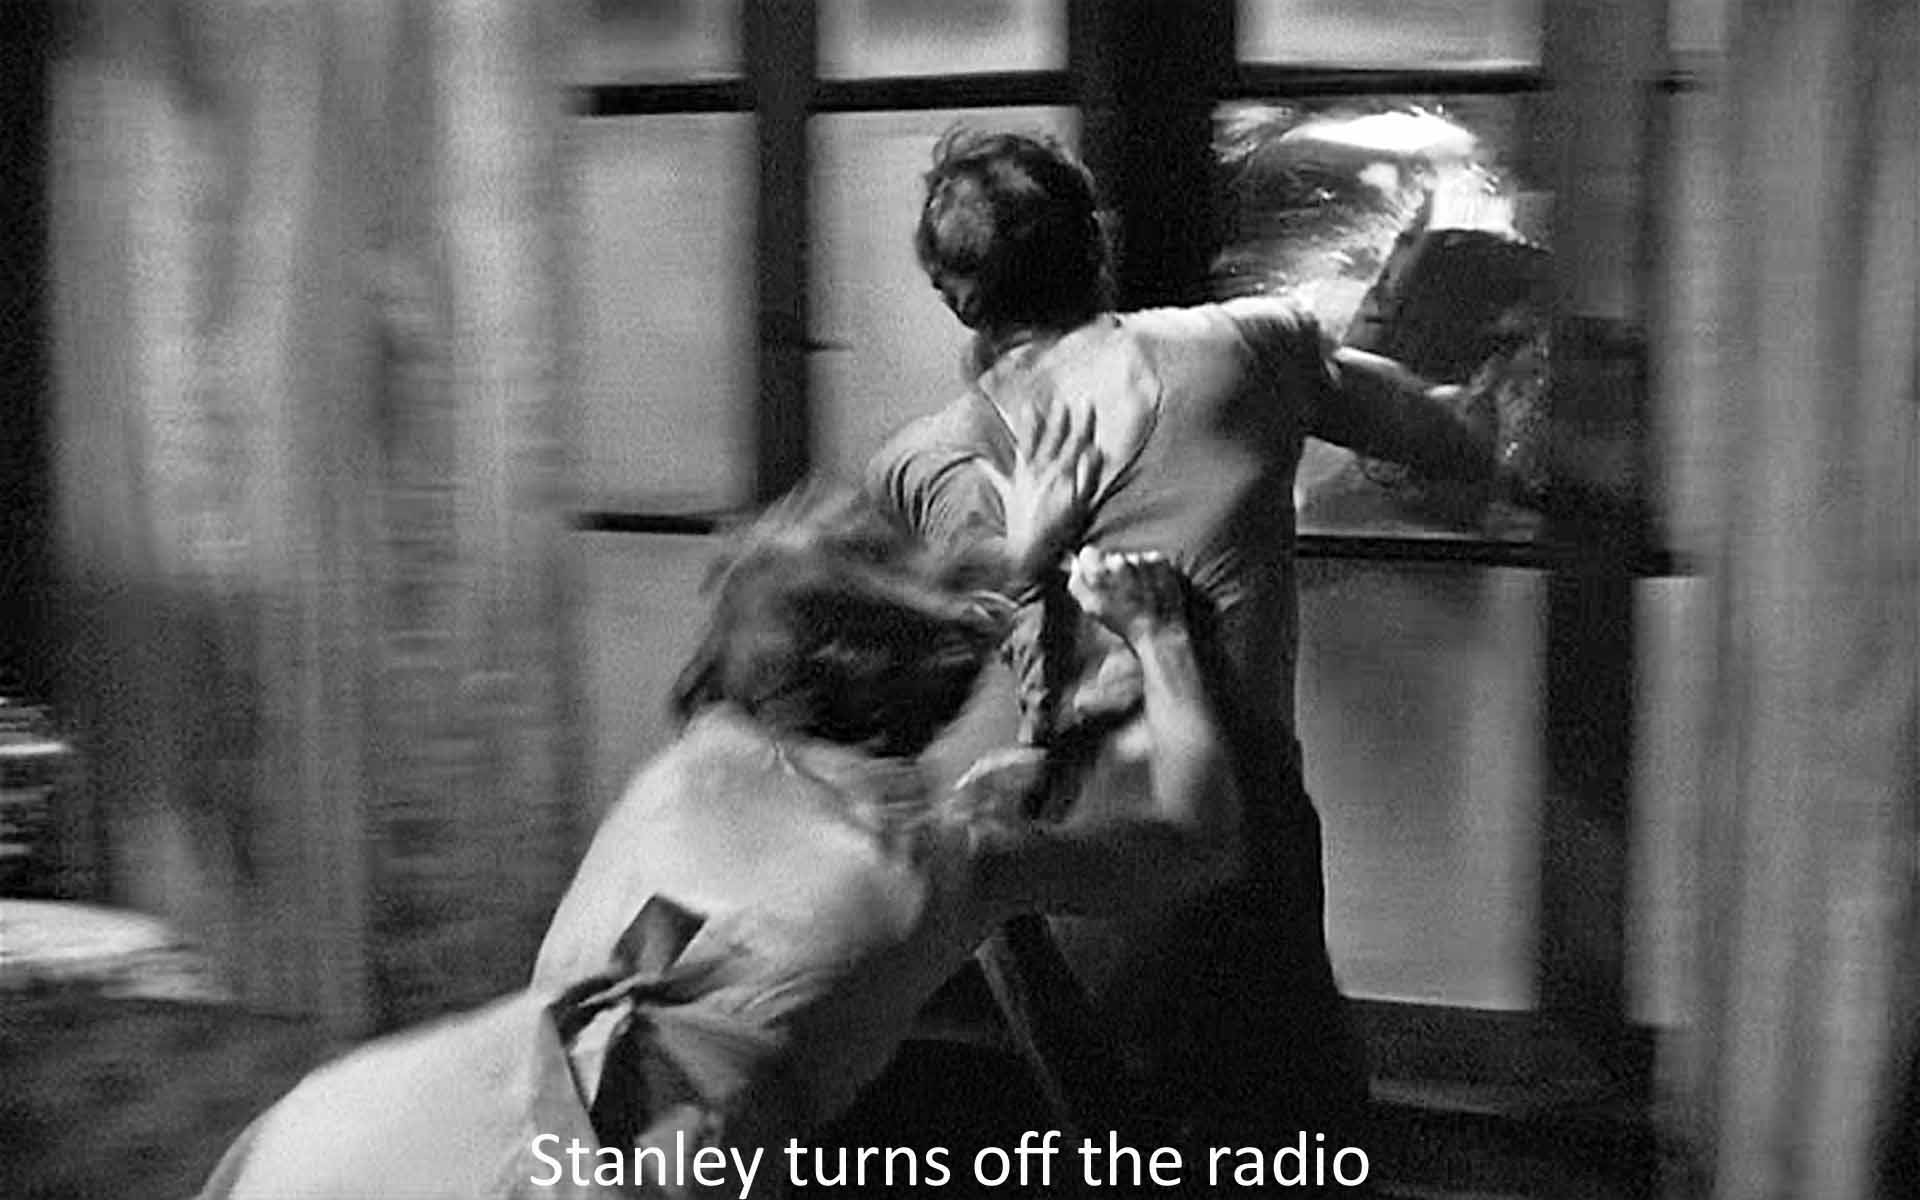 Stanley turns off the radio